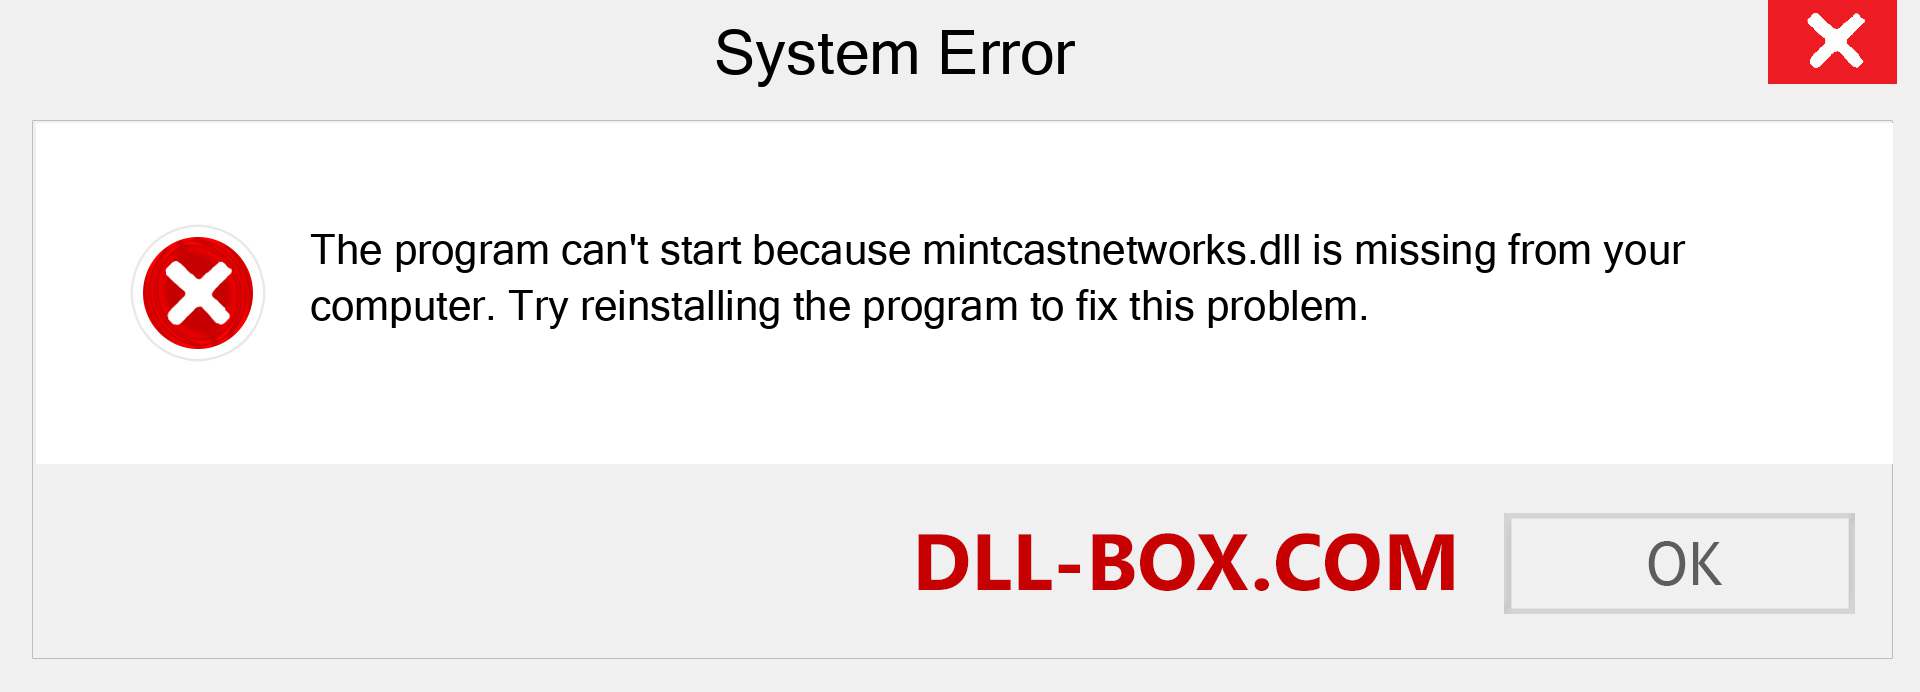  mintcastnetworks.dll file is missing?. Download for Windows 7, 8, 10 - Fix  mintcastnetworks dll Missing Error on Windows, photos, images